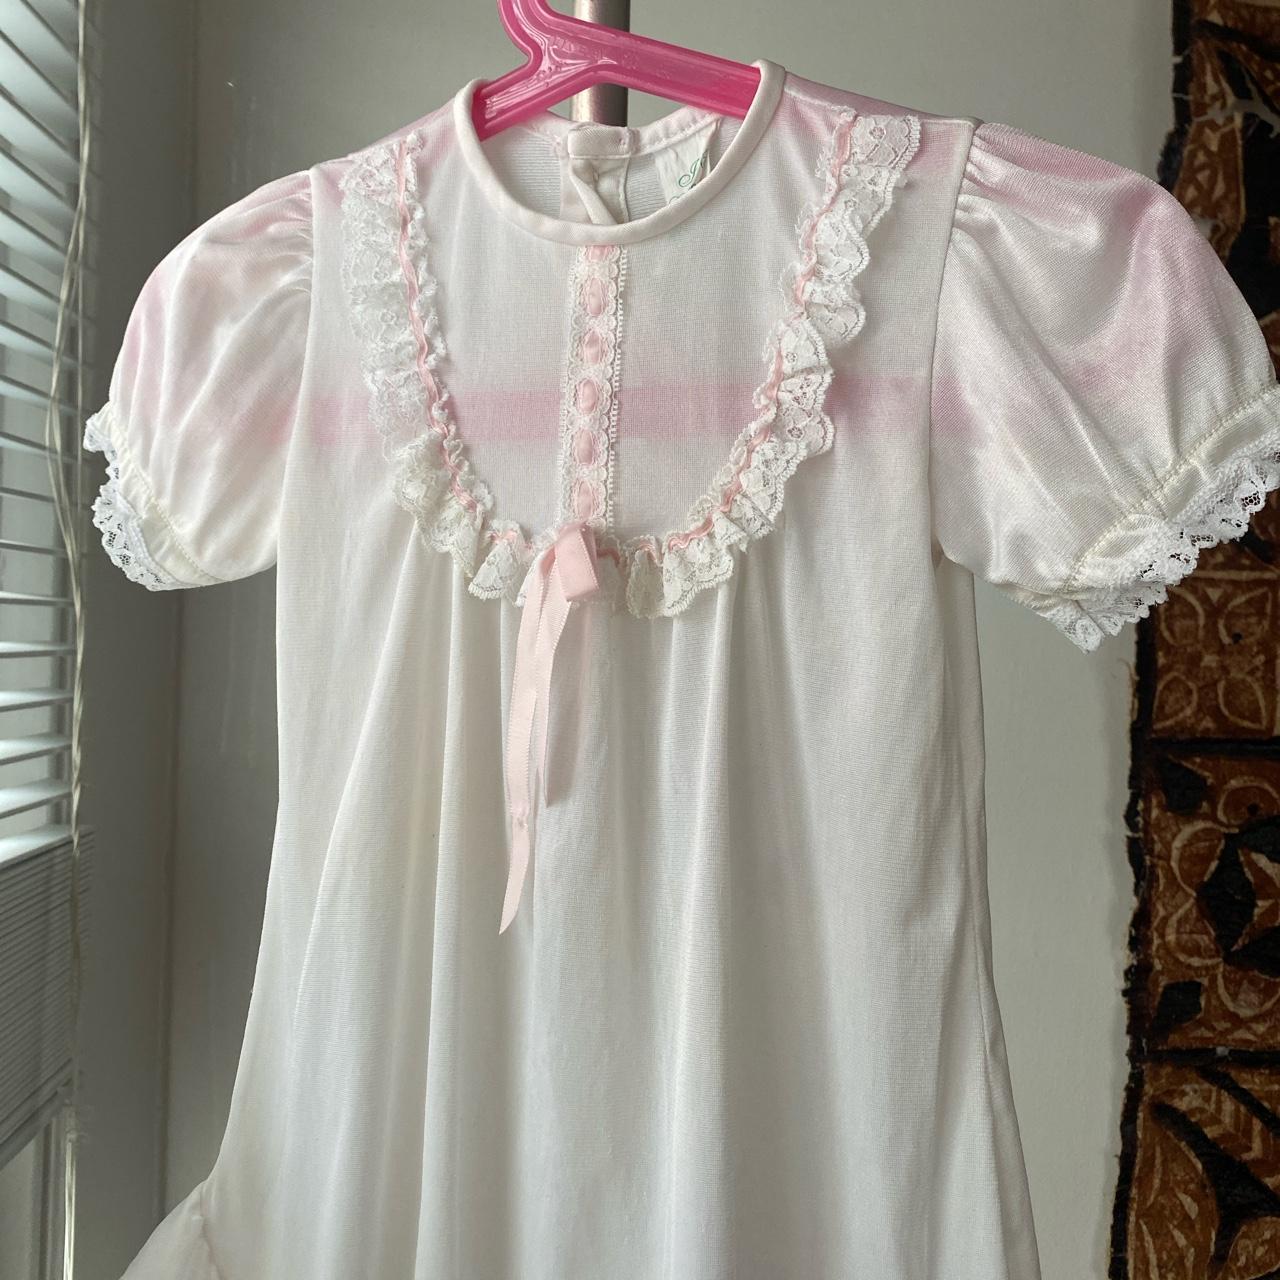 Cute lil girls nightgown - nylon and vintage! Size... - Depop